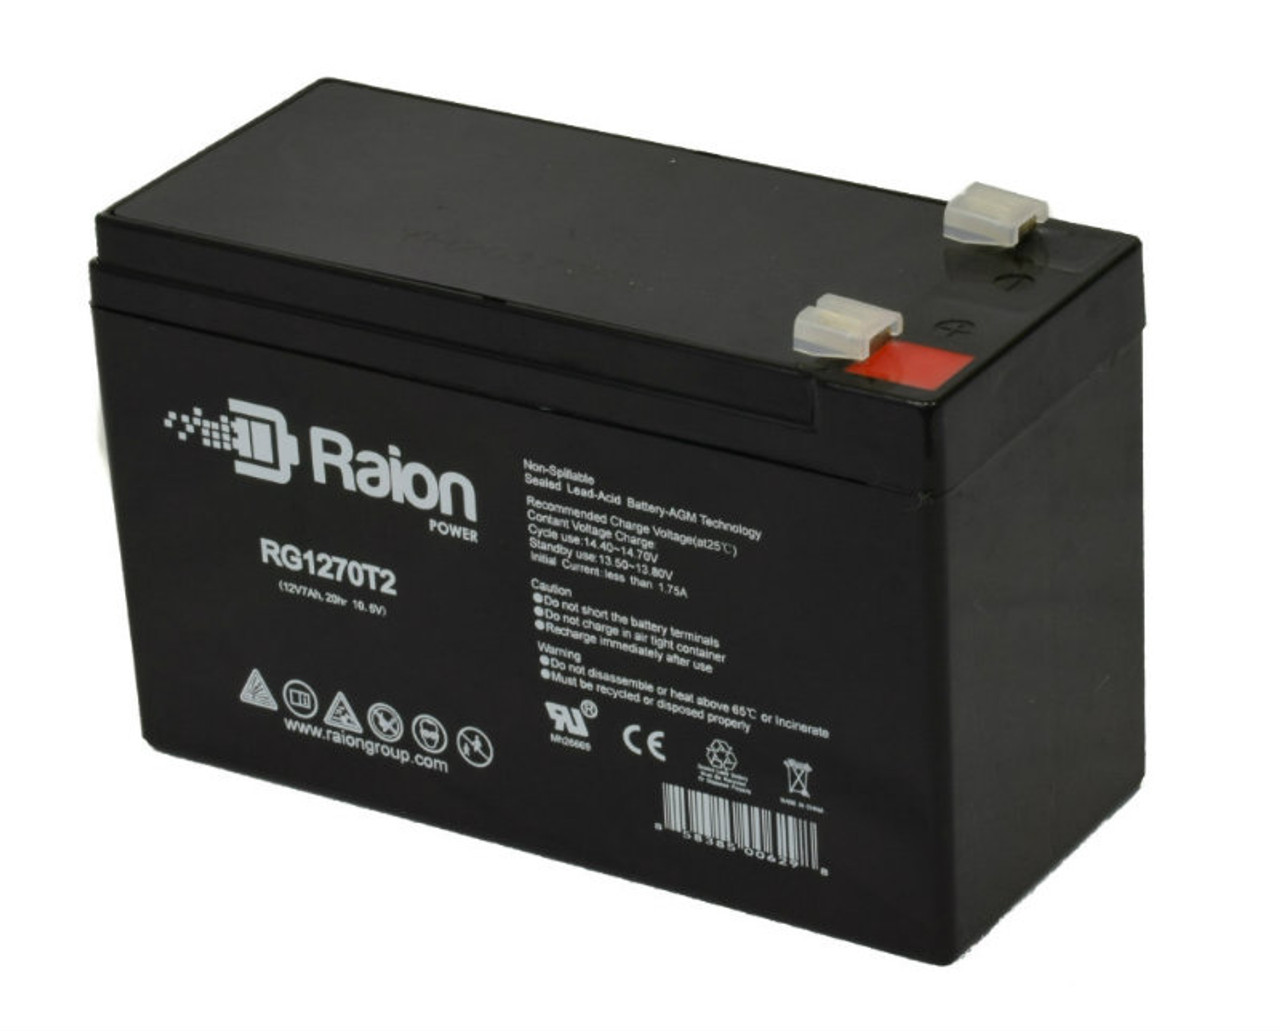 Raion Power RG1270T1 12V 7Ah Non-Spillable Replacement Battery for Aritech BS326